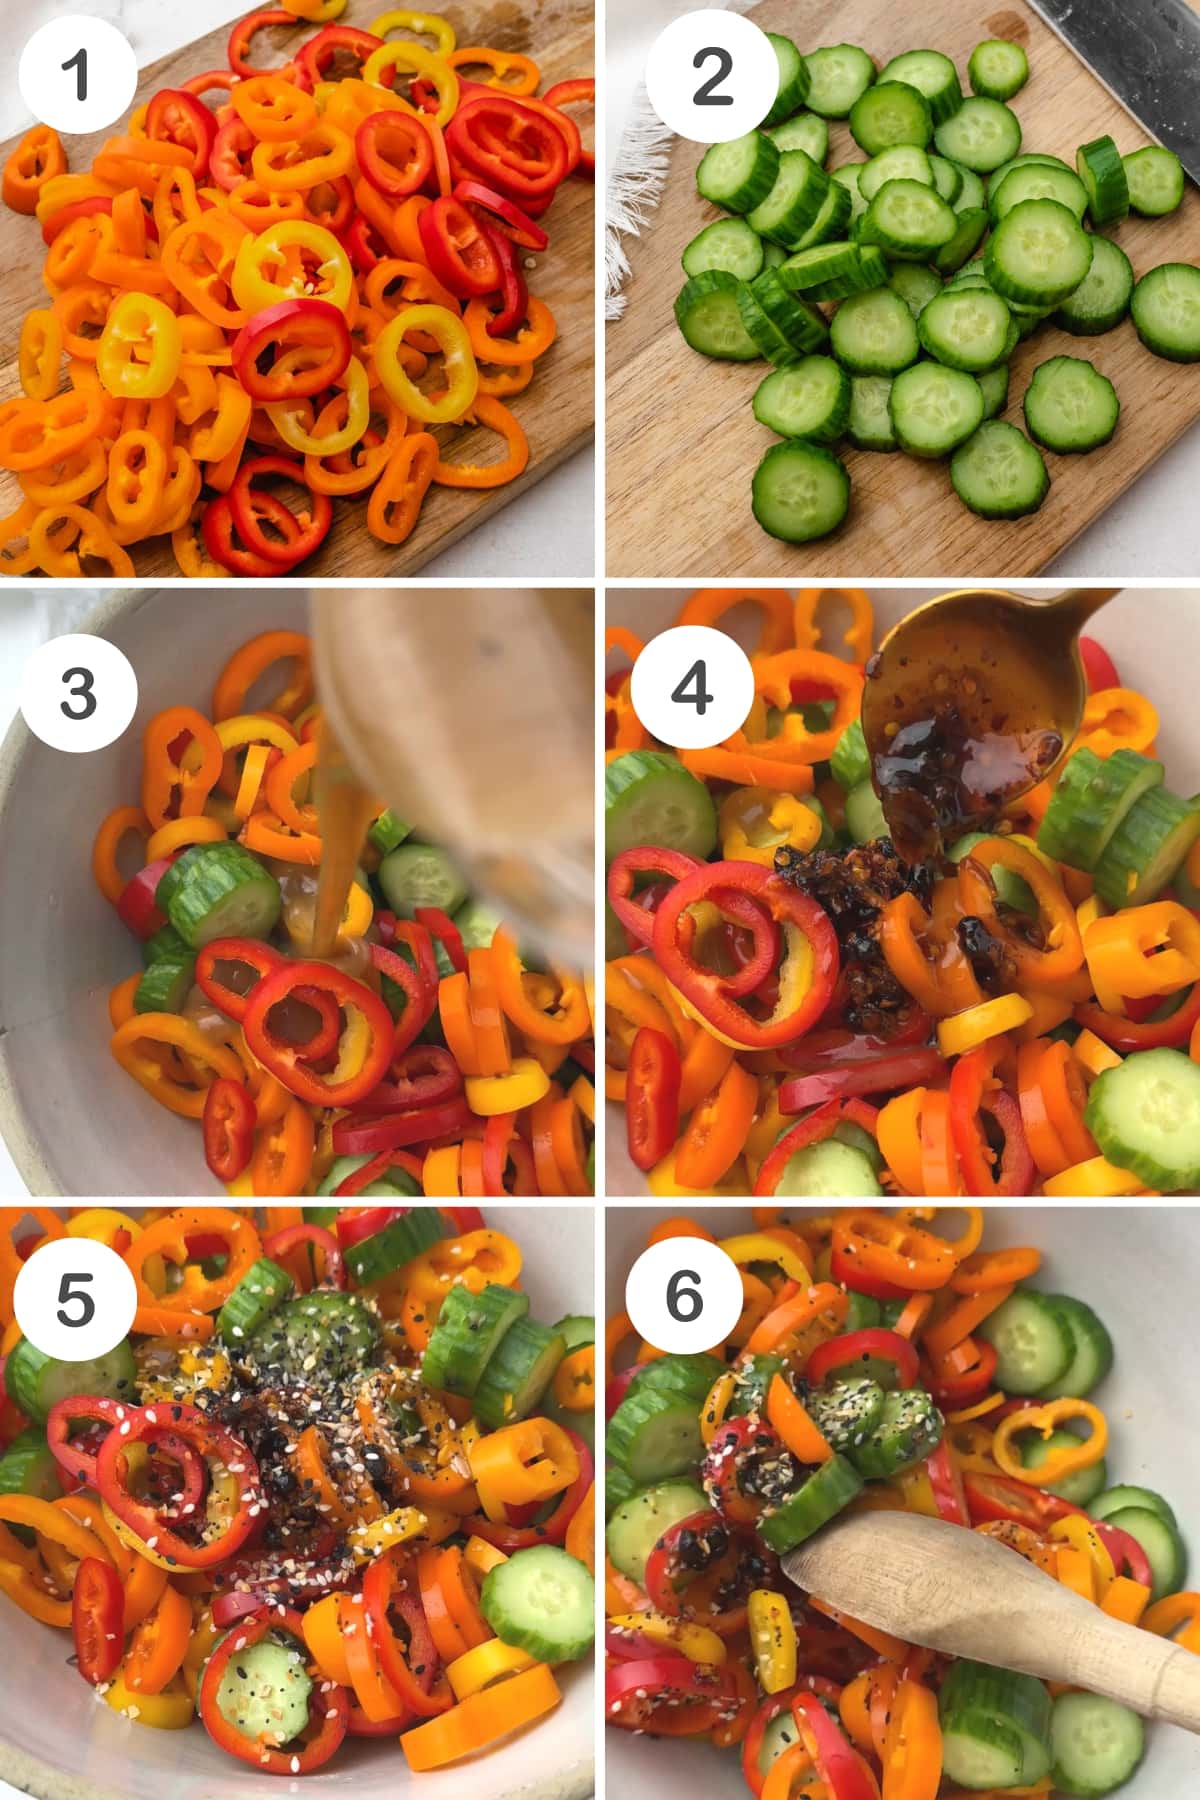 numbered step by step photos showing how to make this bell pepper salad